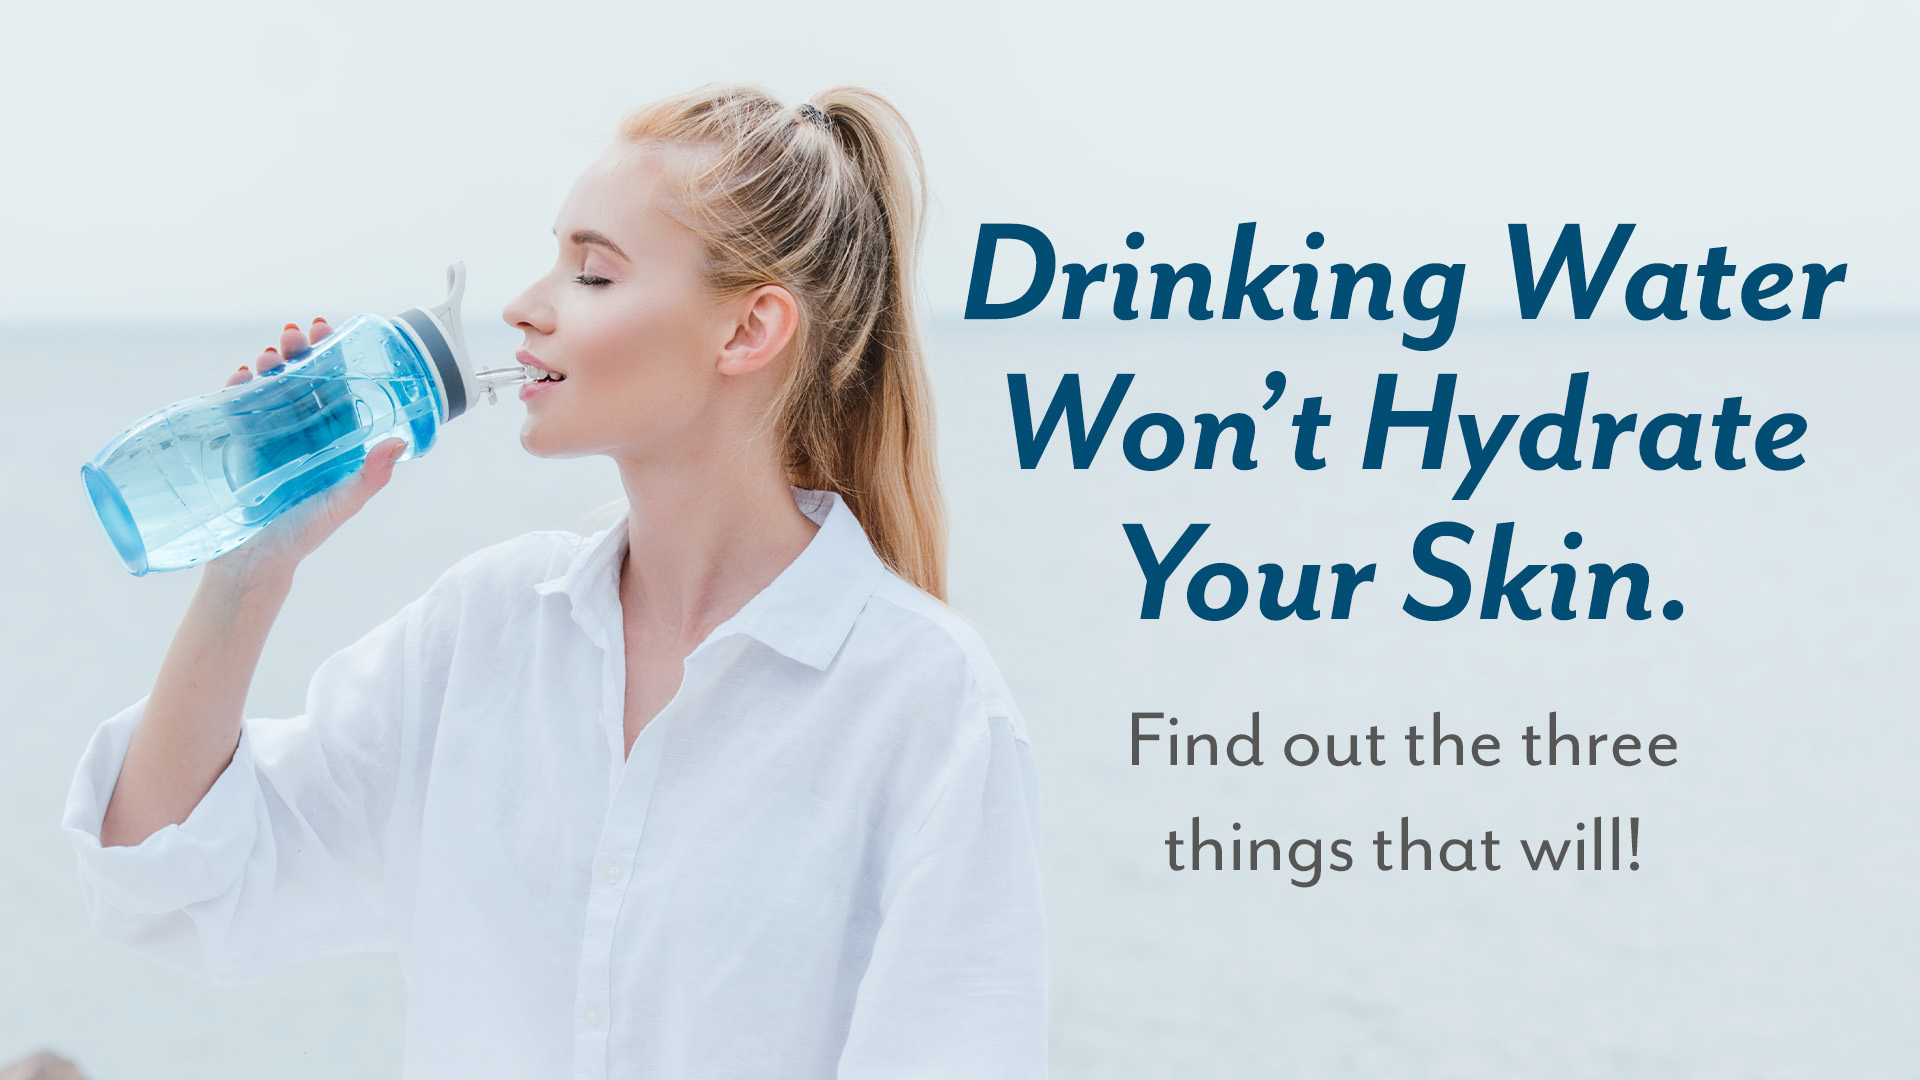 Drinking water won't hydrate your skin. Find out three things that will!